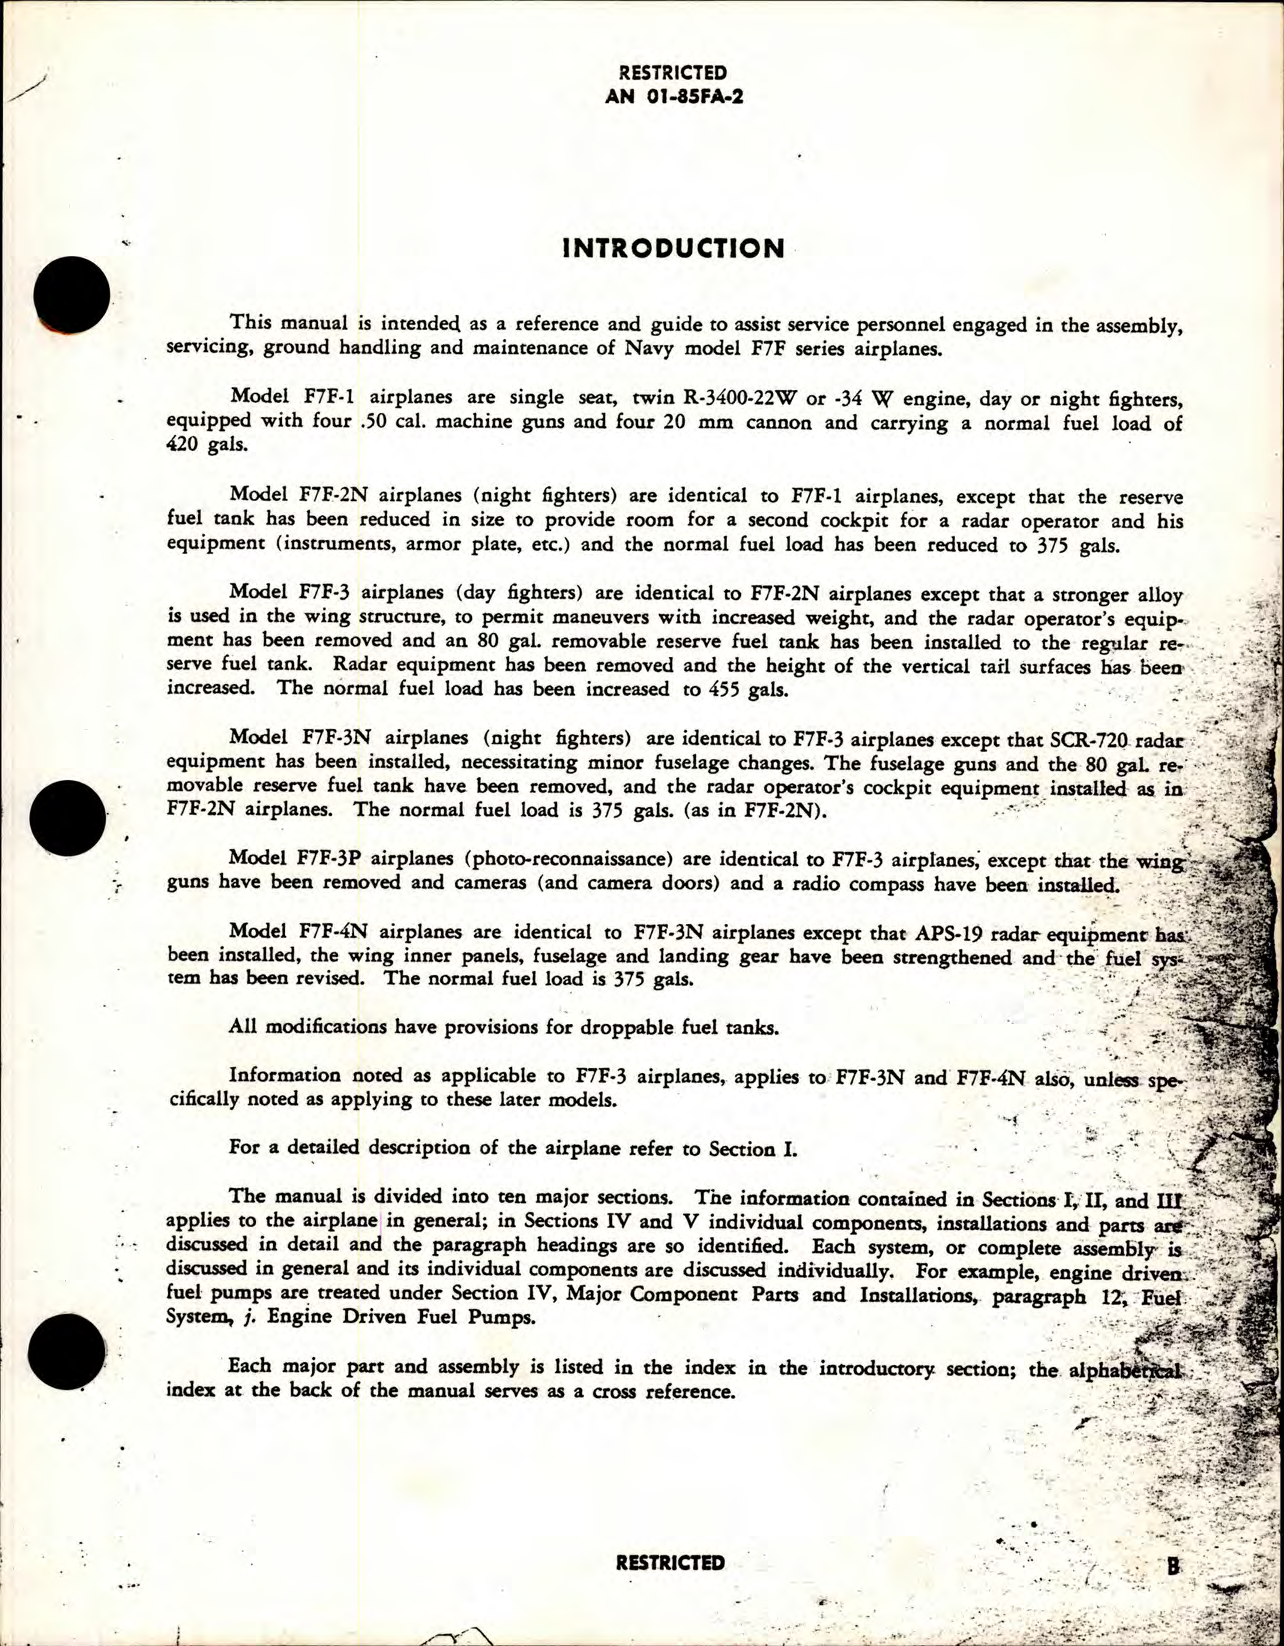 Sample page 5 from AirCorps Library document: Erection and Maintenance for F7F-1N, F7F-2N, F7F-3, F7F-3N, F7F-4N, and F7F-3P